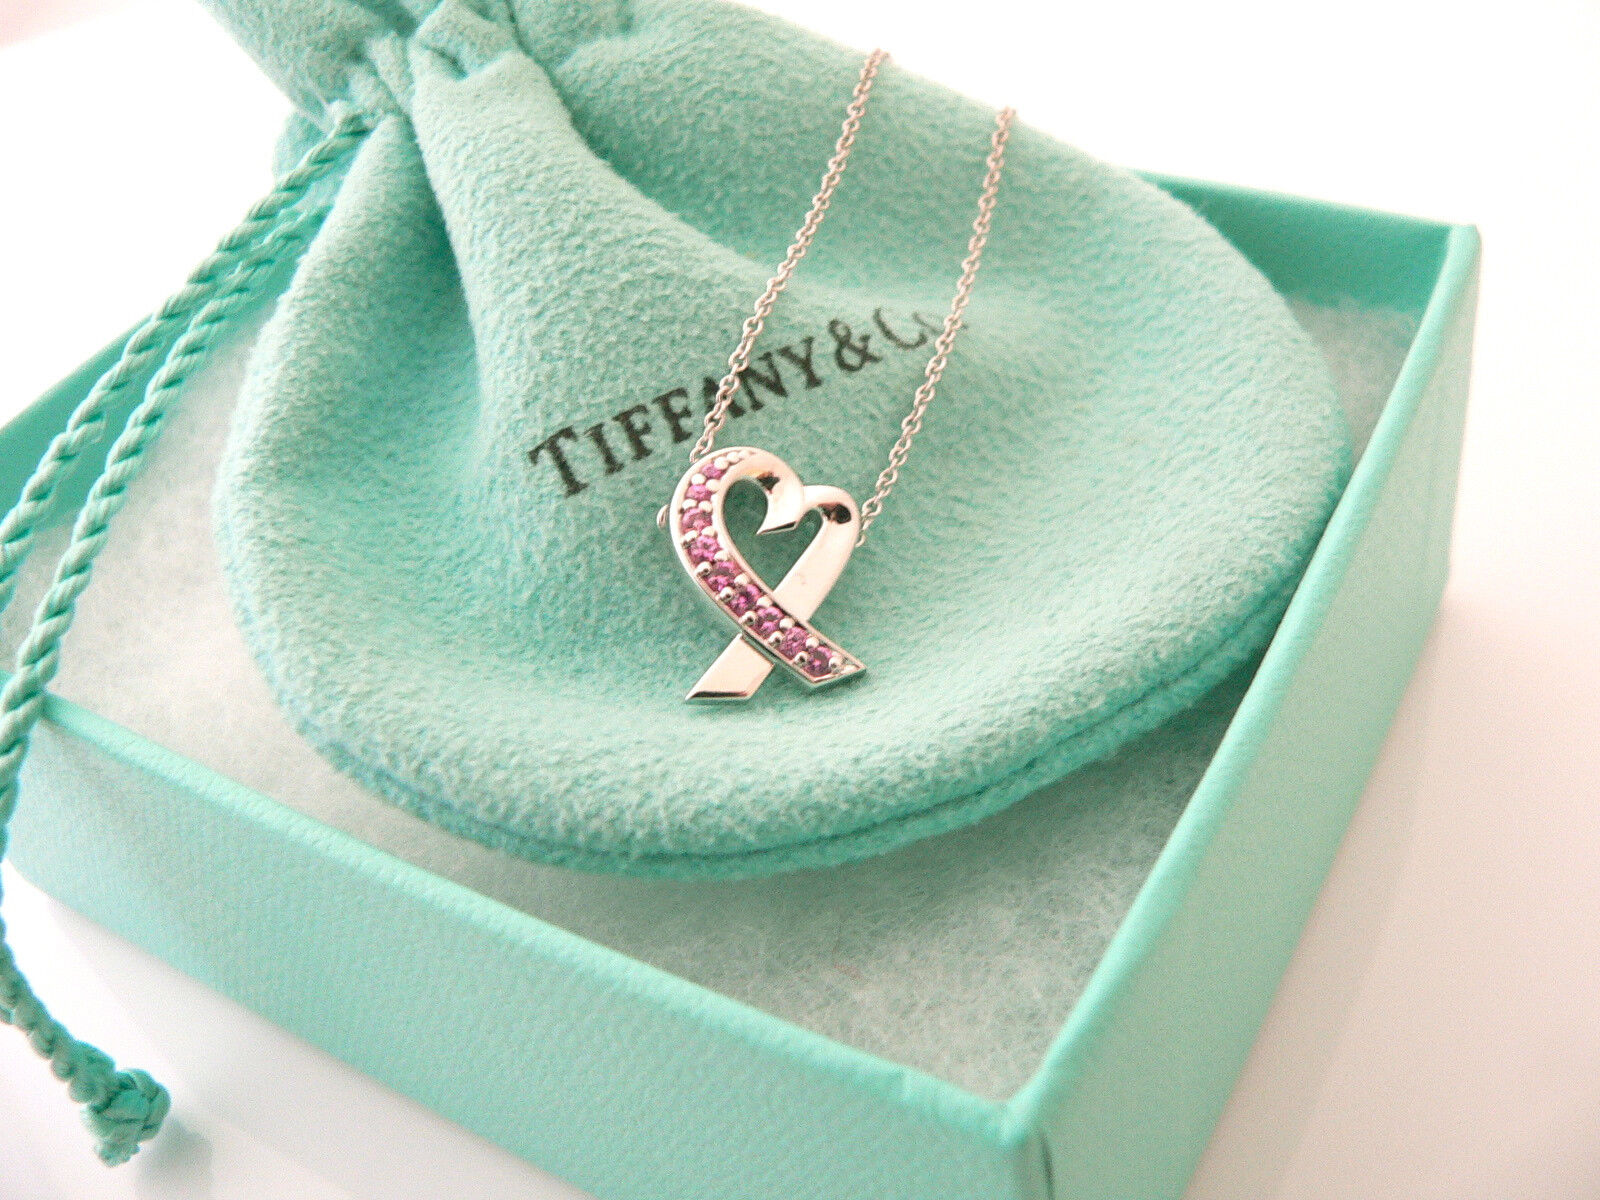 Tiffany & Co 18K Gold Picasso Pink Sapphires Necklace Pendant Charm Chain Gift